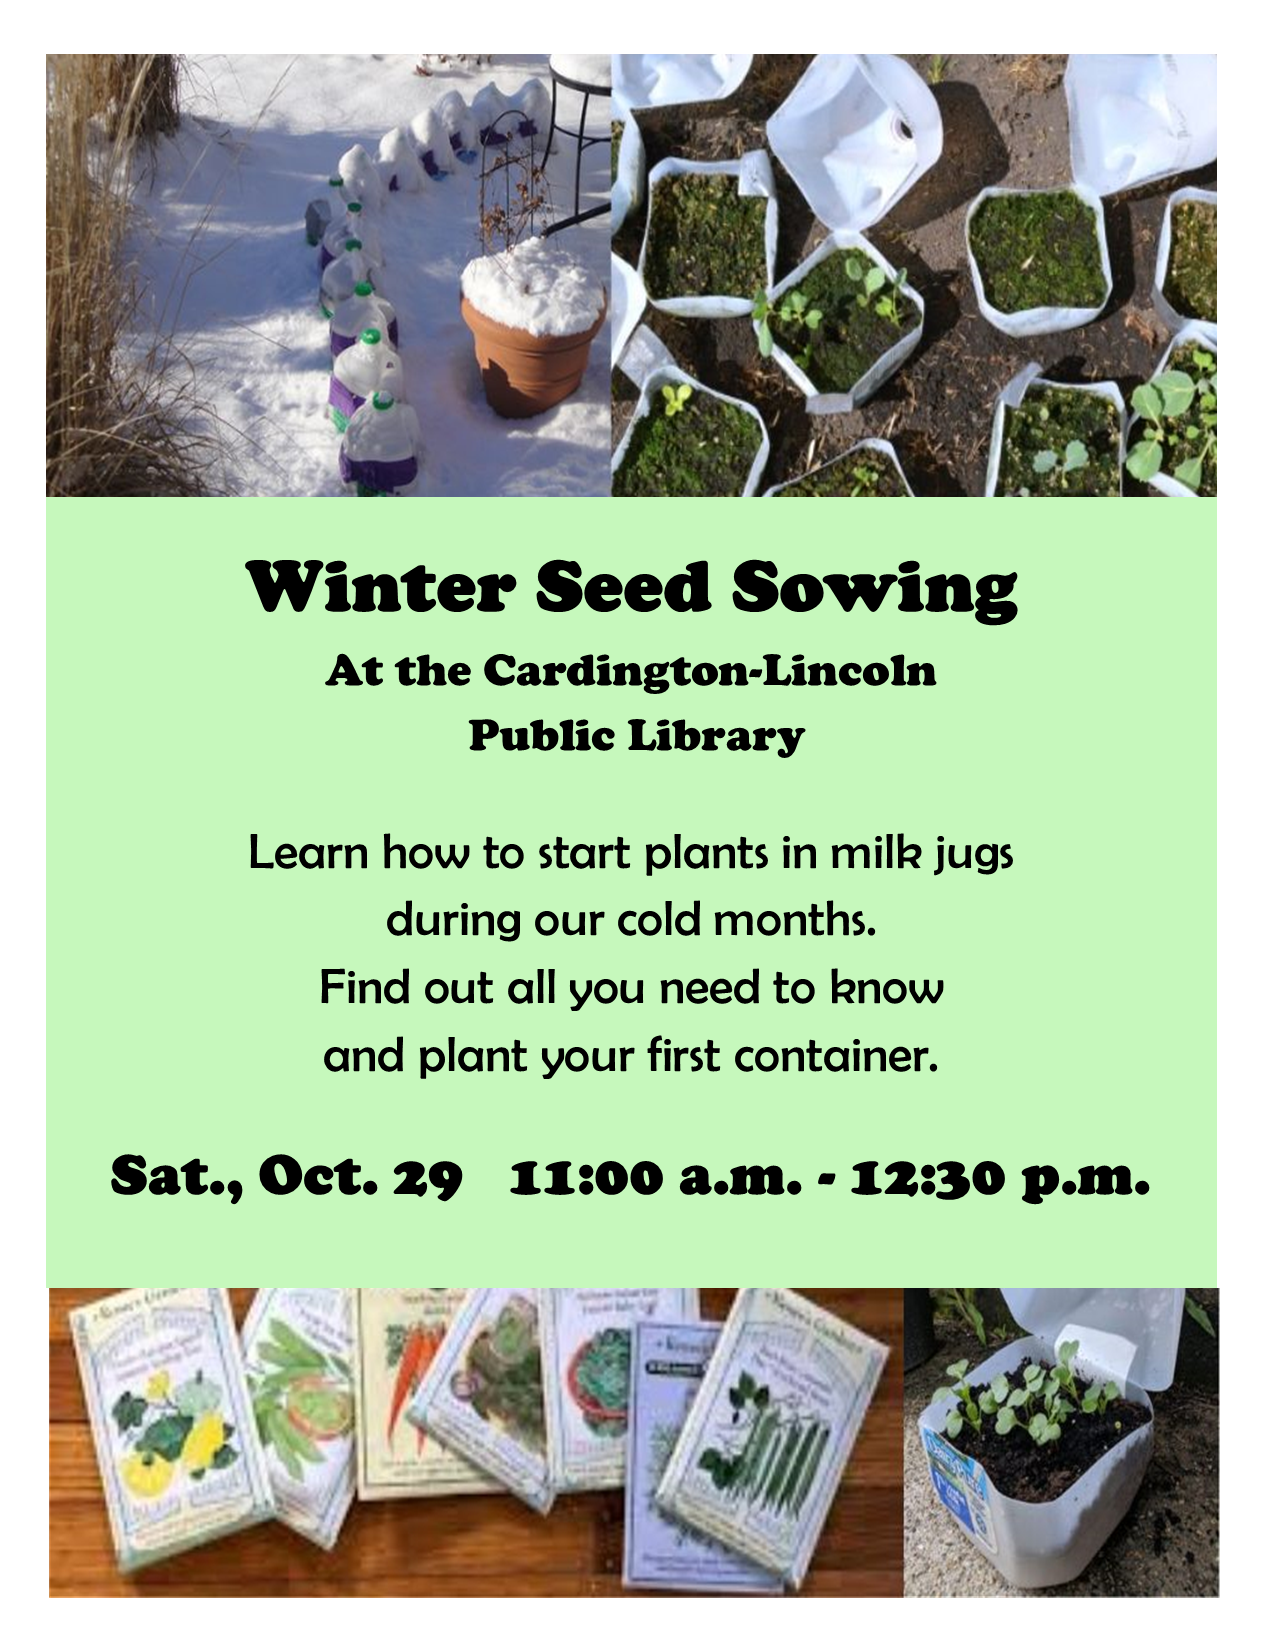 Winter Seed Sowing at the Cardingon-Lincoln Public Library